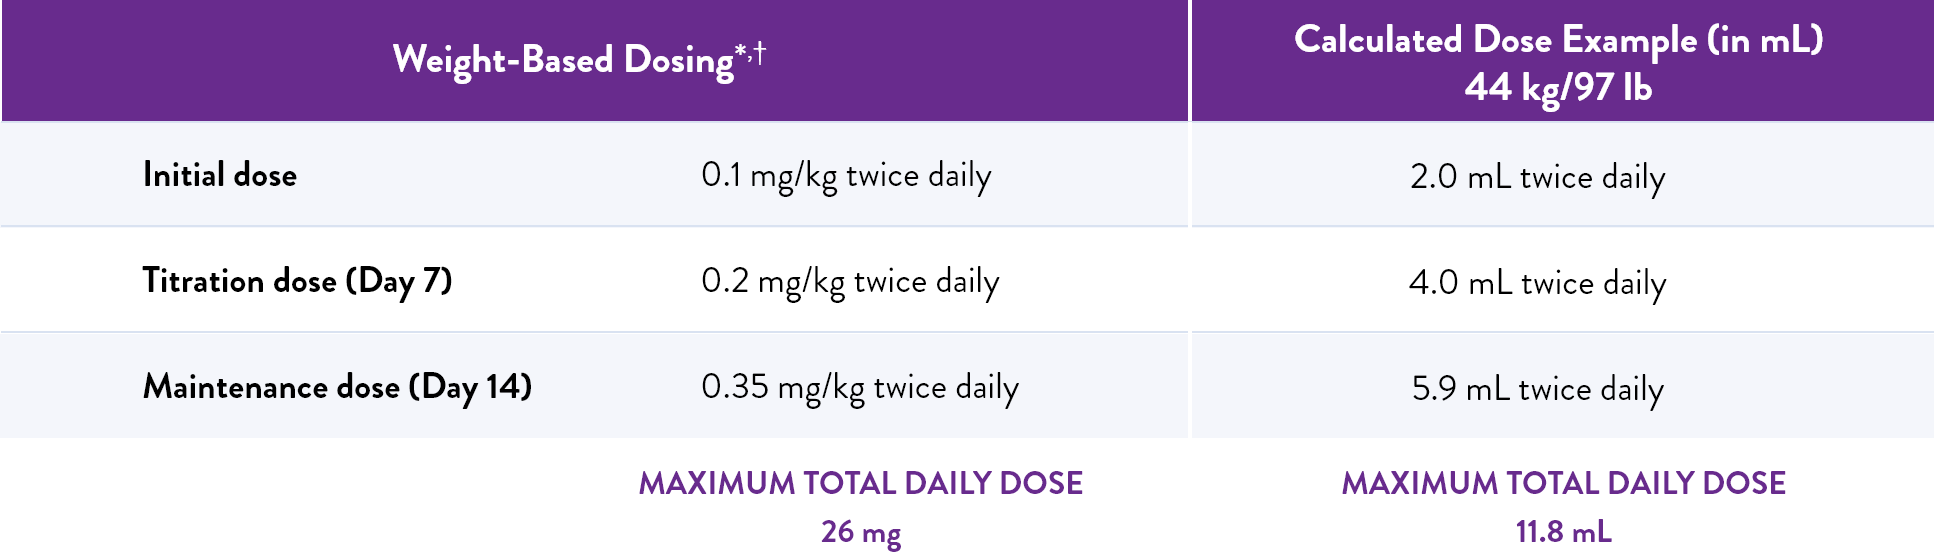 Table showing the recommended weight-based dosing of FINTEPLA®.